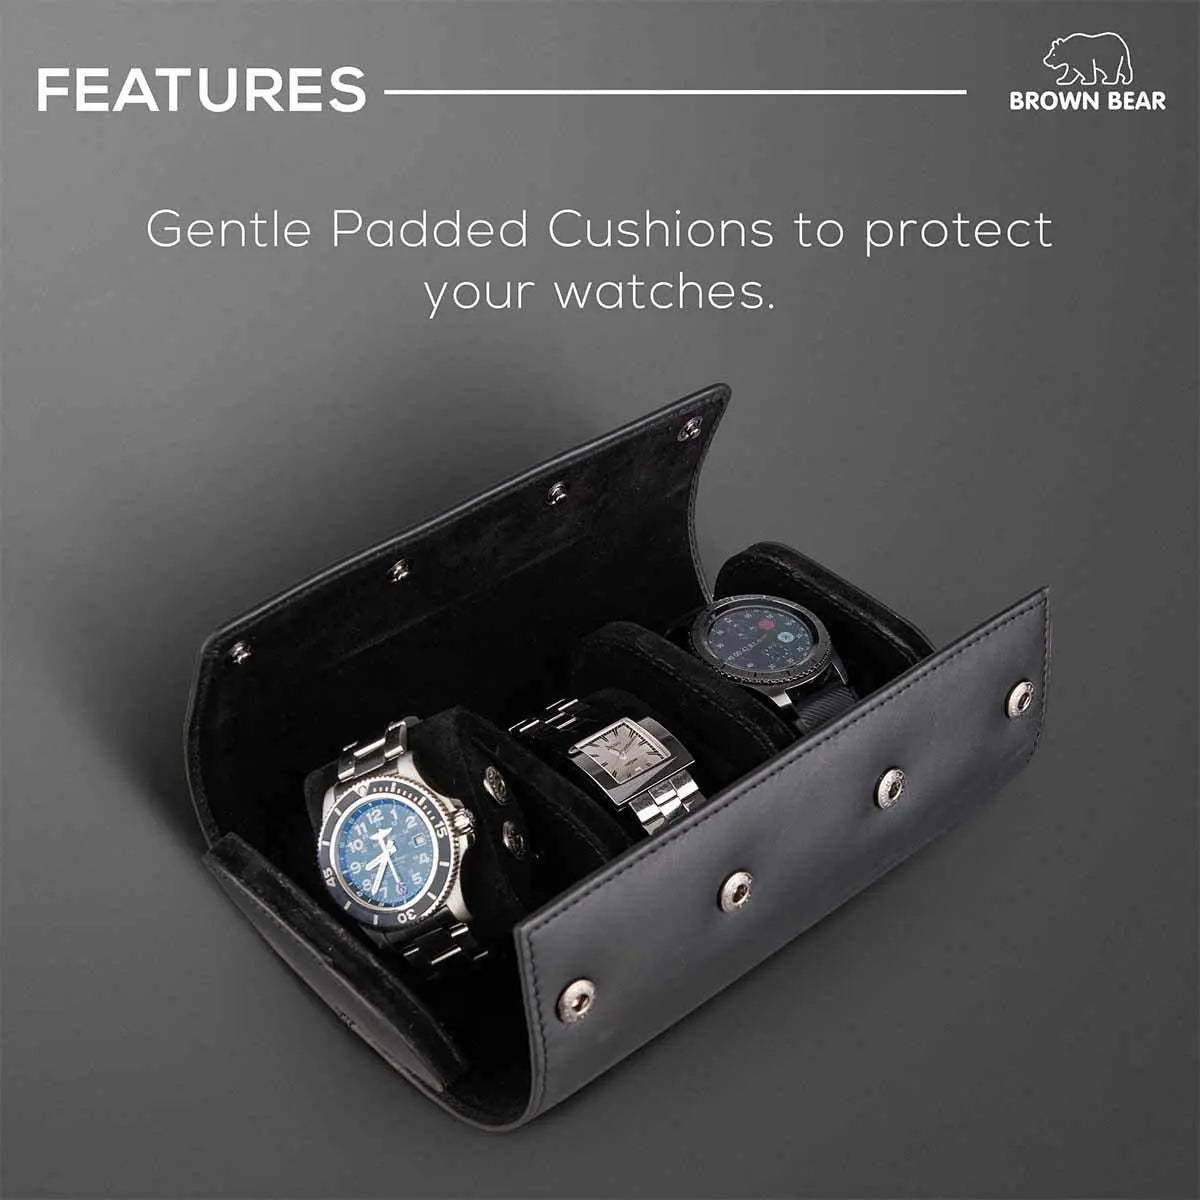 Glenor Co Watch Box with Valet Drawer for Men - 12 Slot Luxury Watch Case  Display Organizer, Carbon Fiber Design - Metal Buckle for Mens Jewelry  Watches, Men's Storage Boxes Holder has